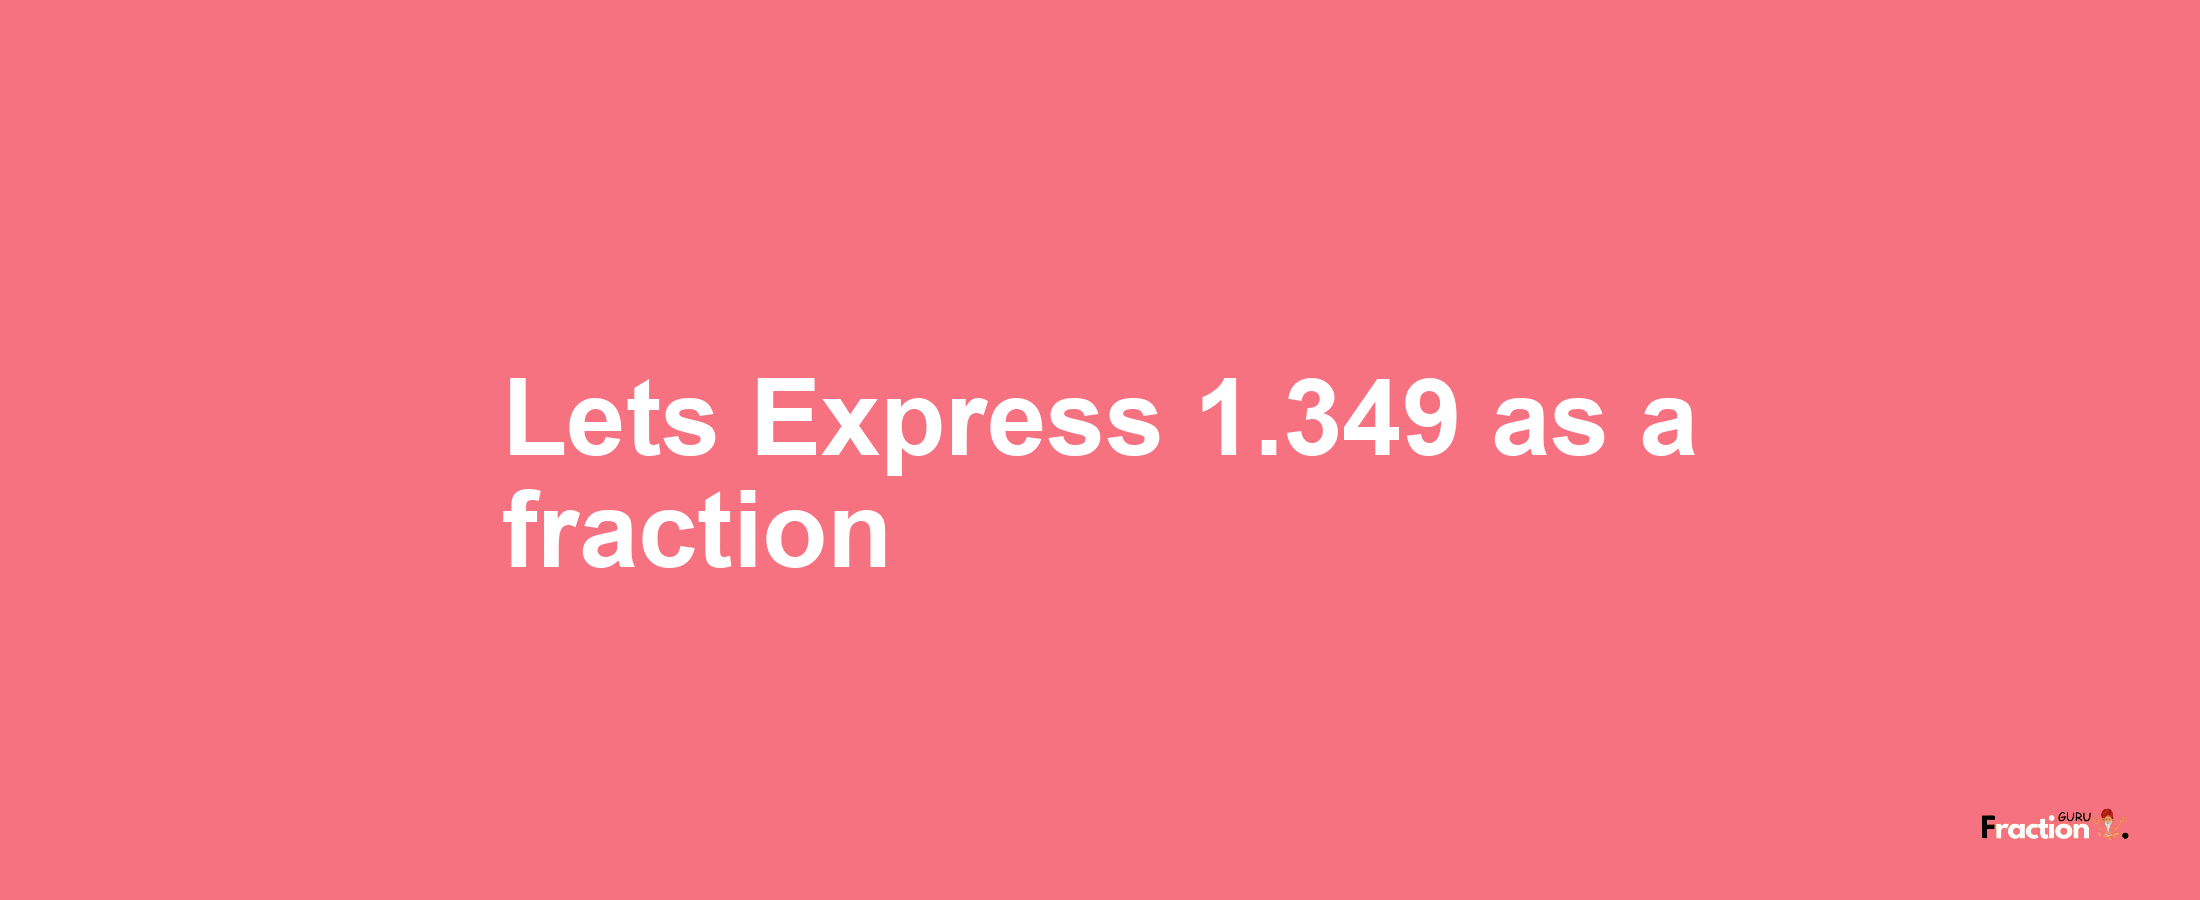 Lets Express 1.349 as afraction